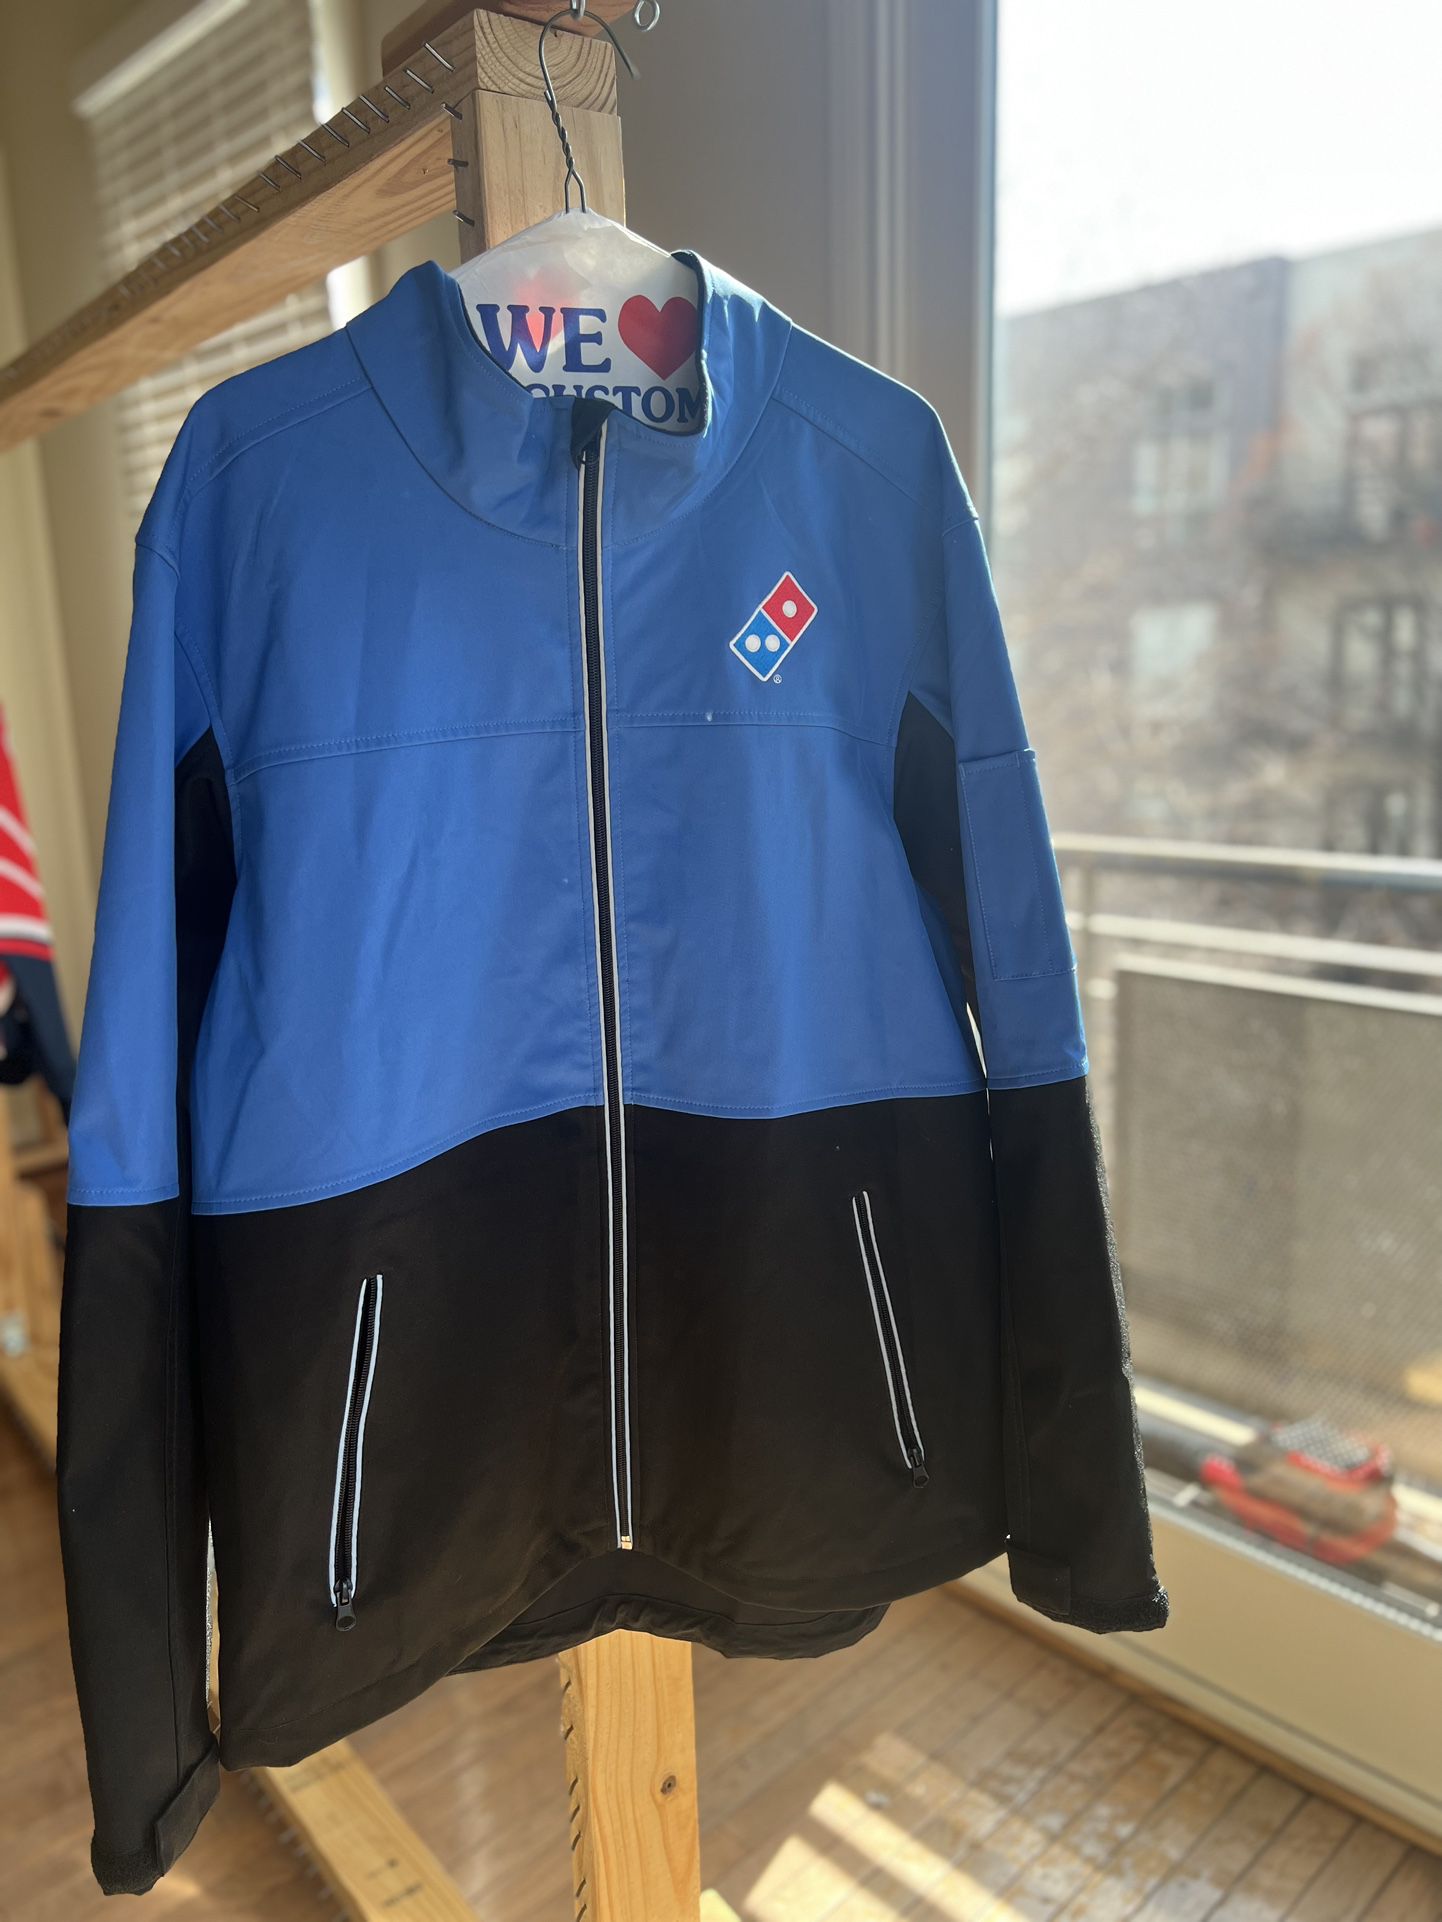 Stylish Dominos Pizza Delivery Jacket